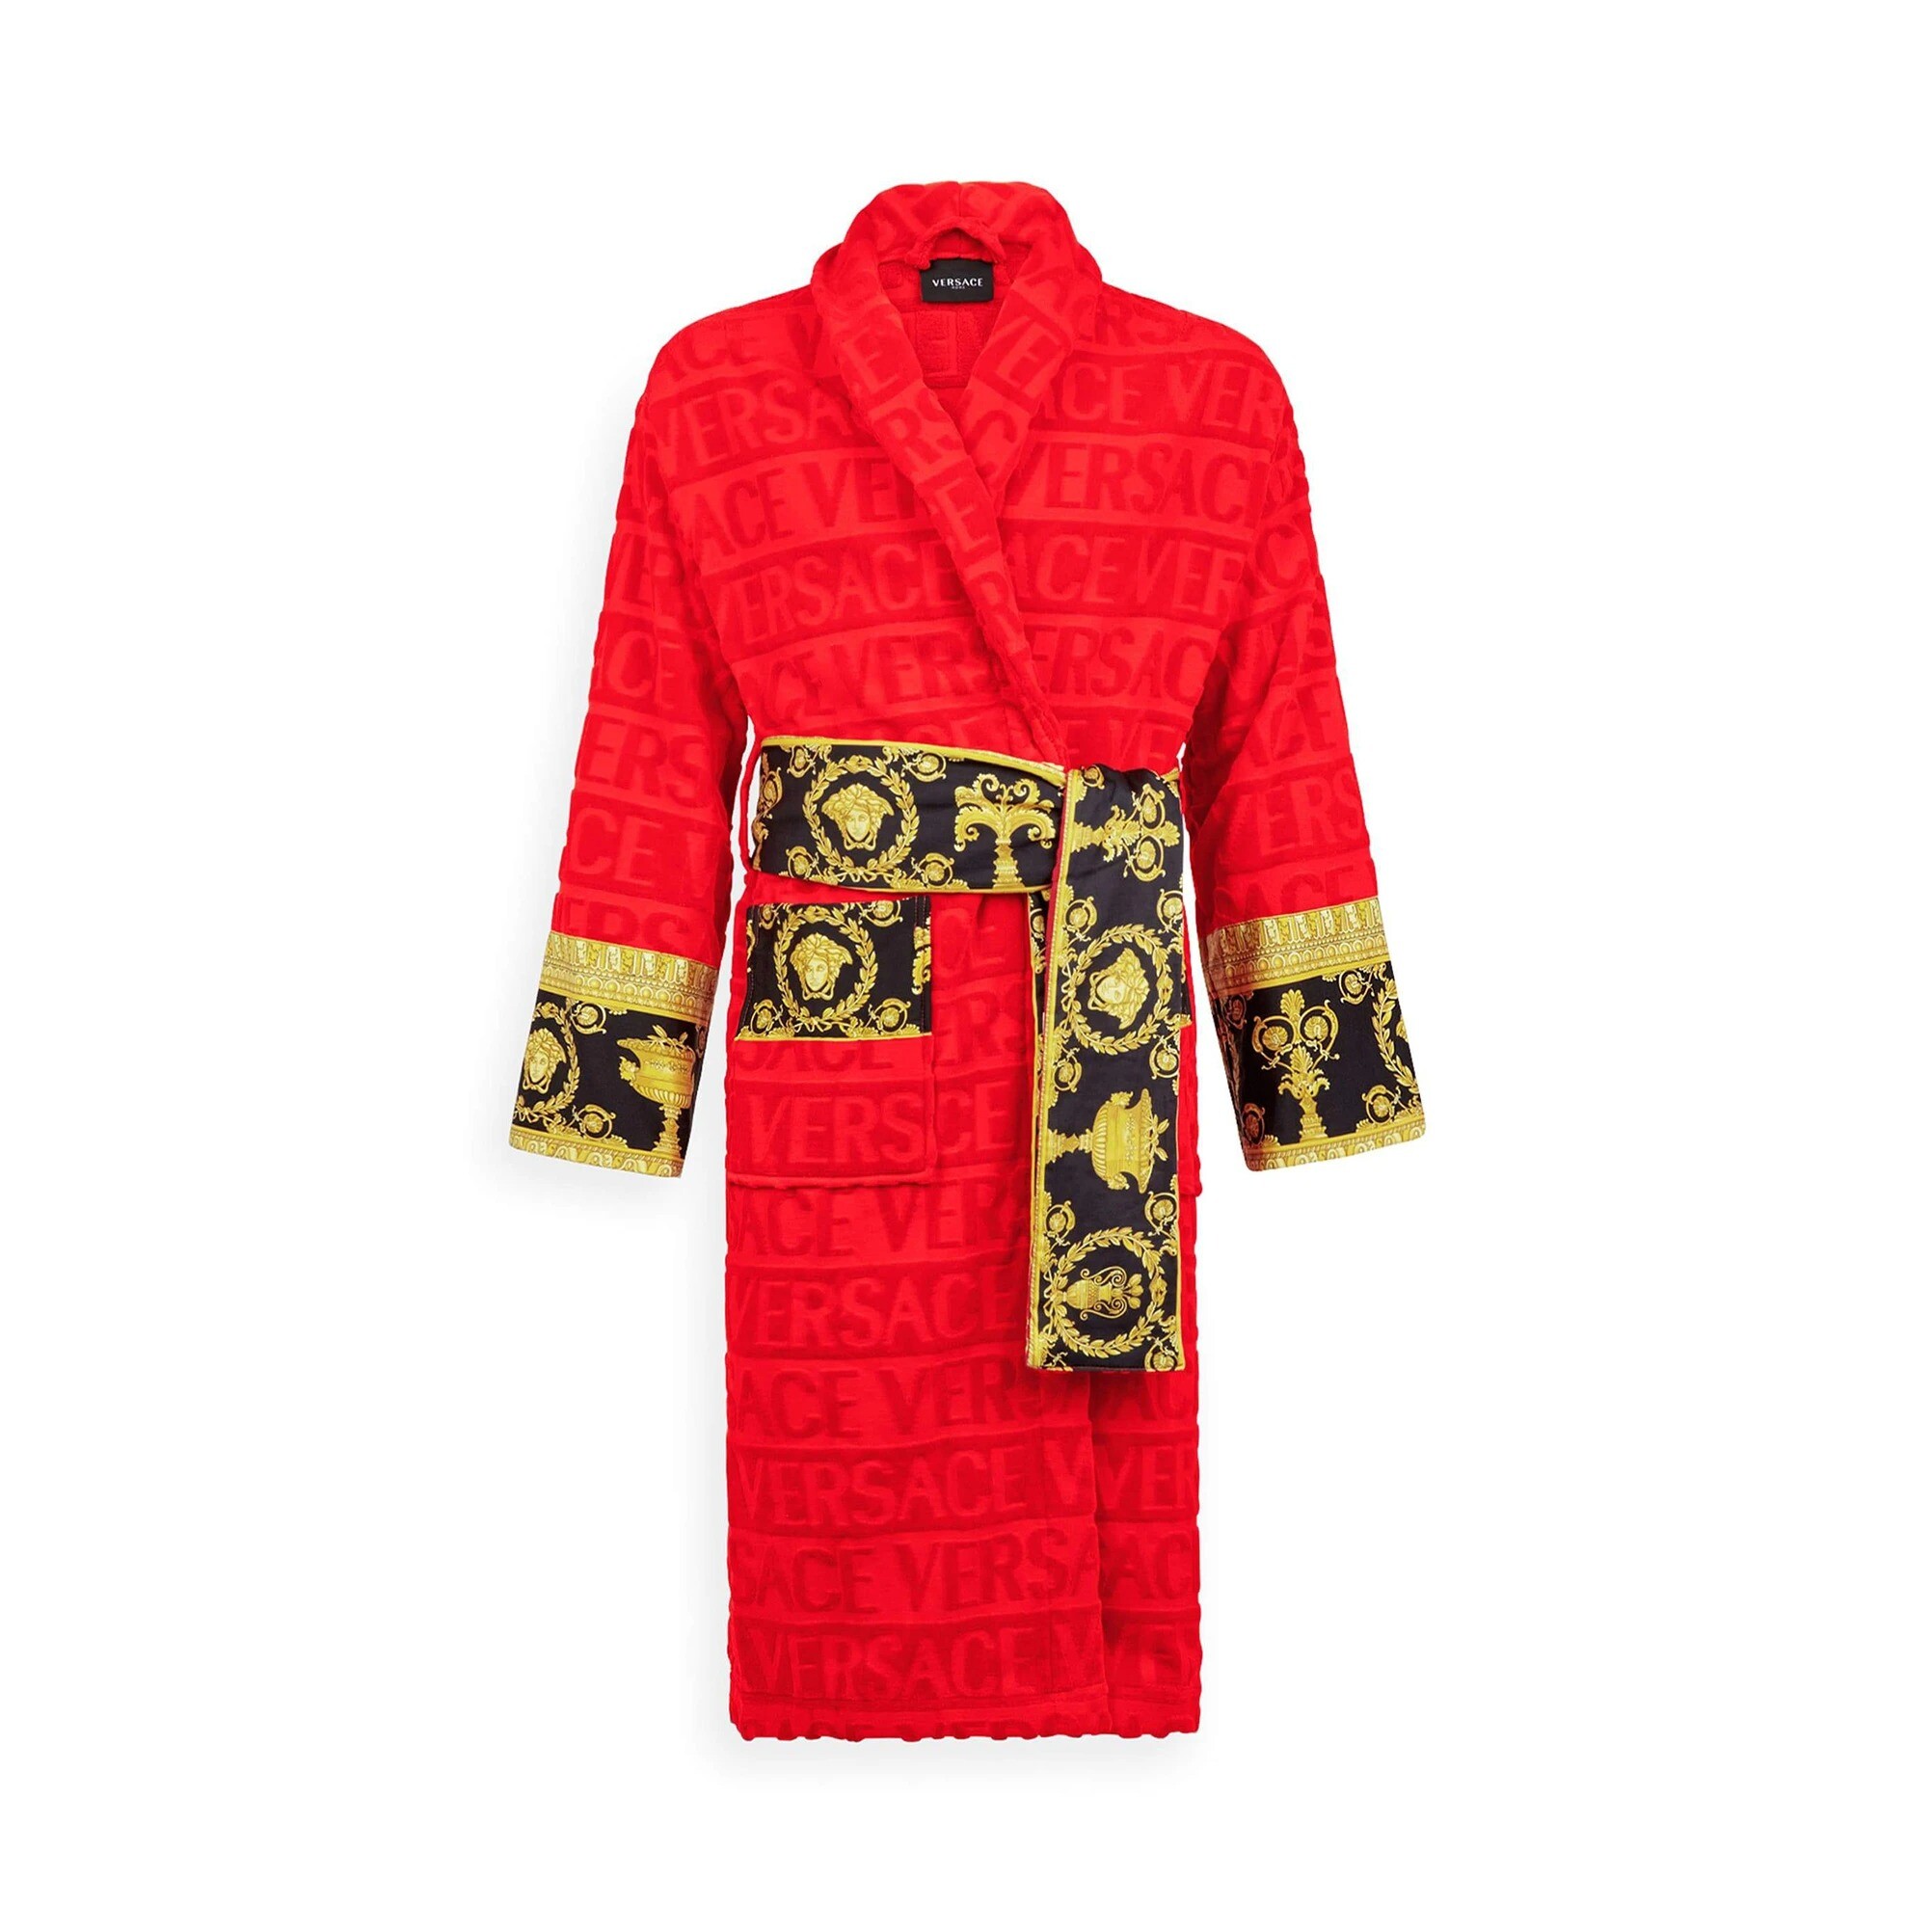 Buy > versace dressing gown red > in stock